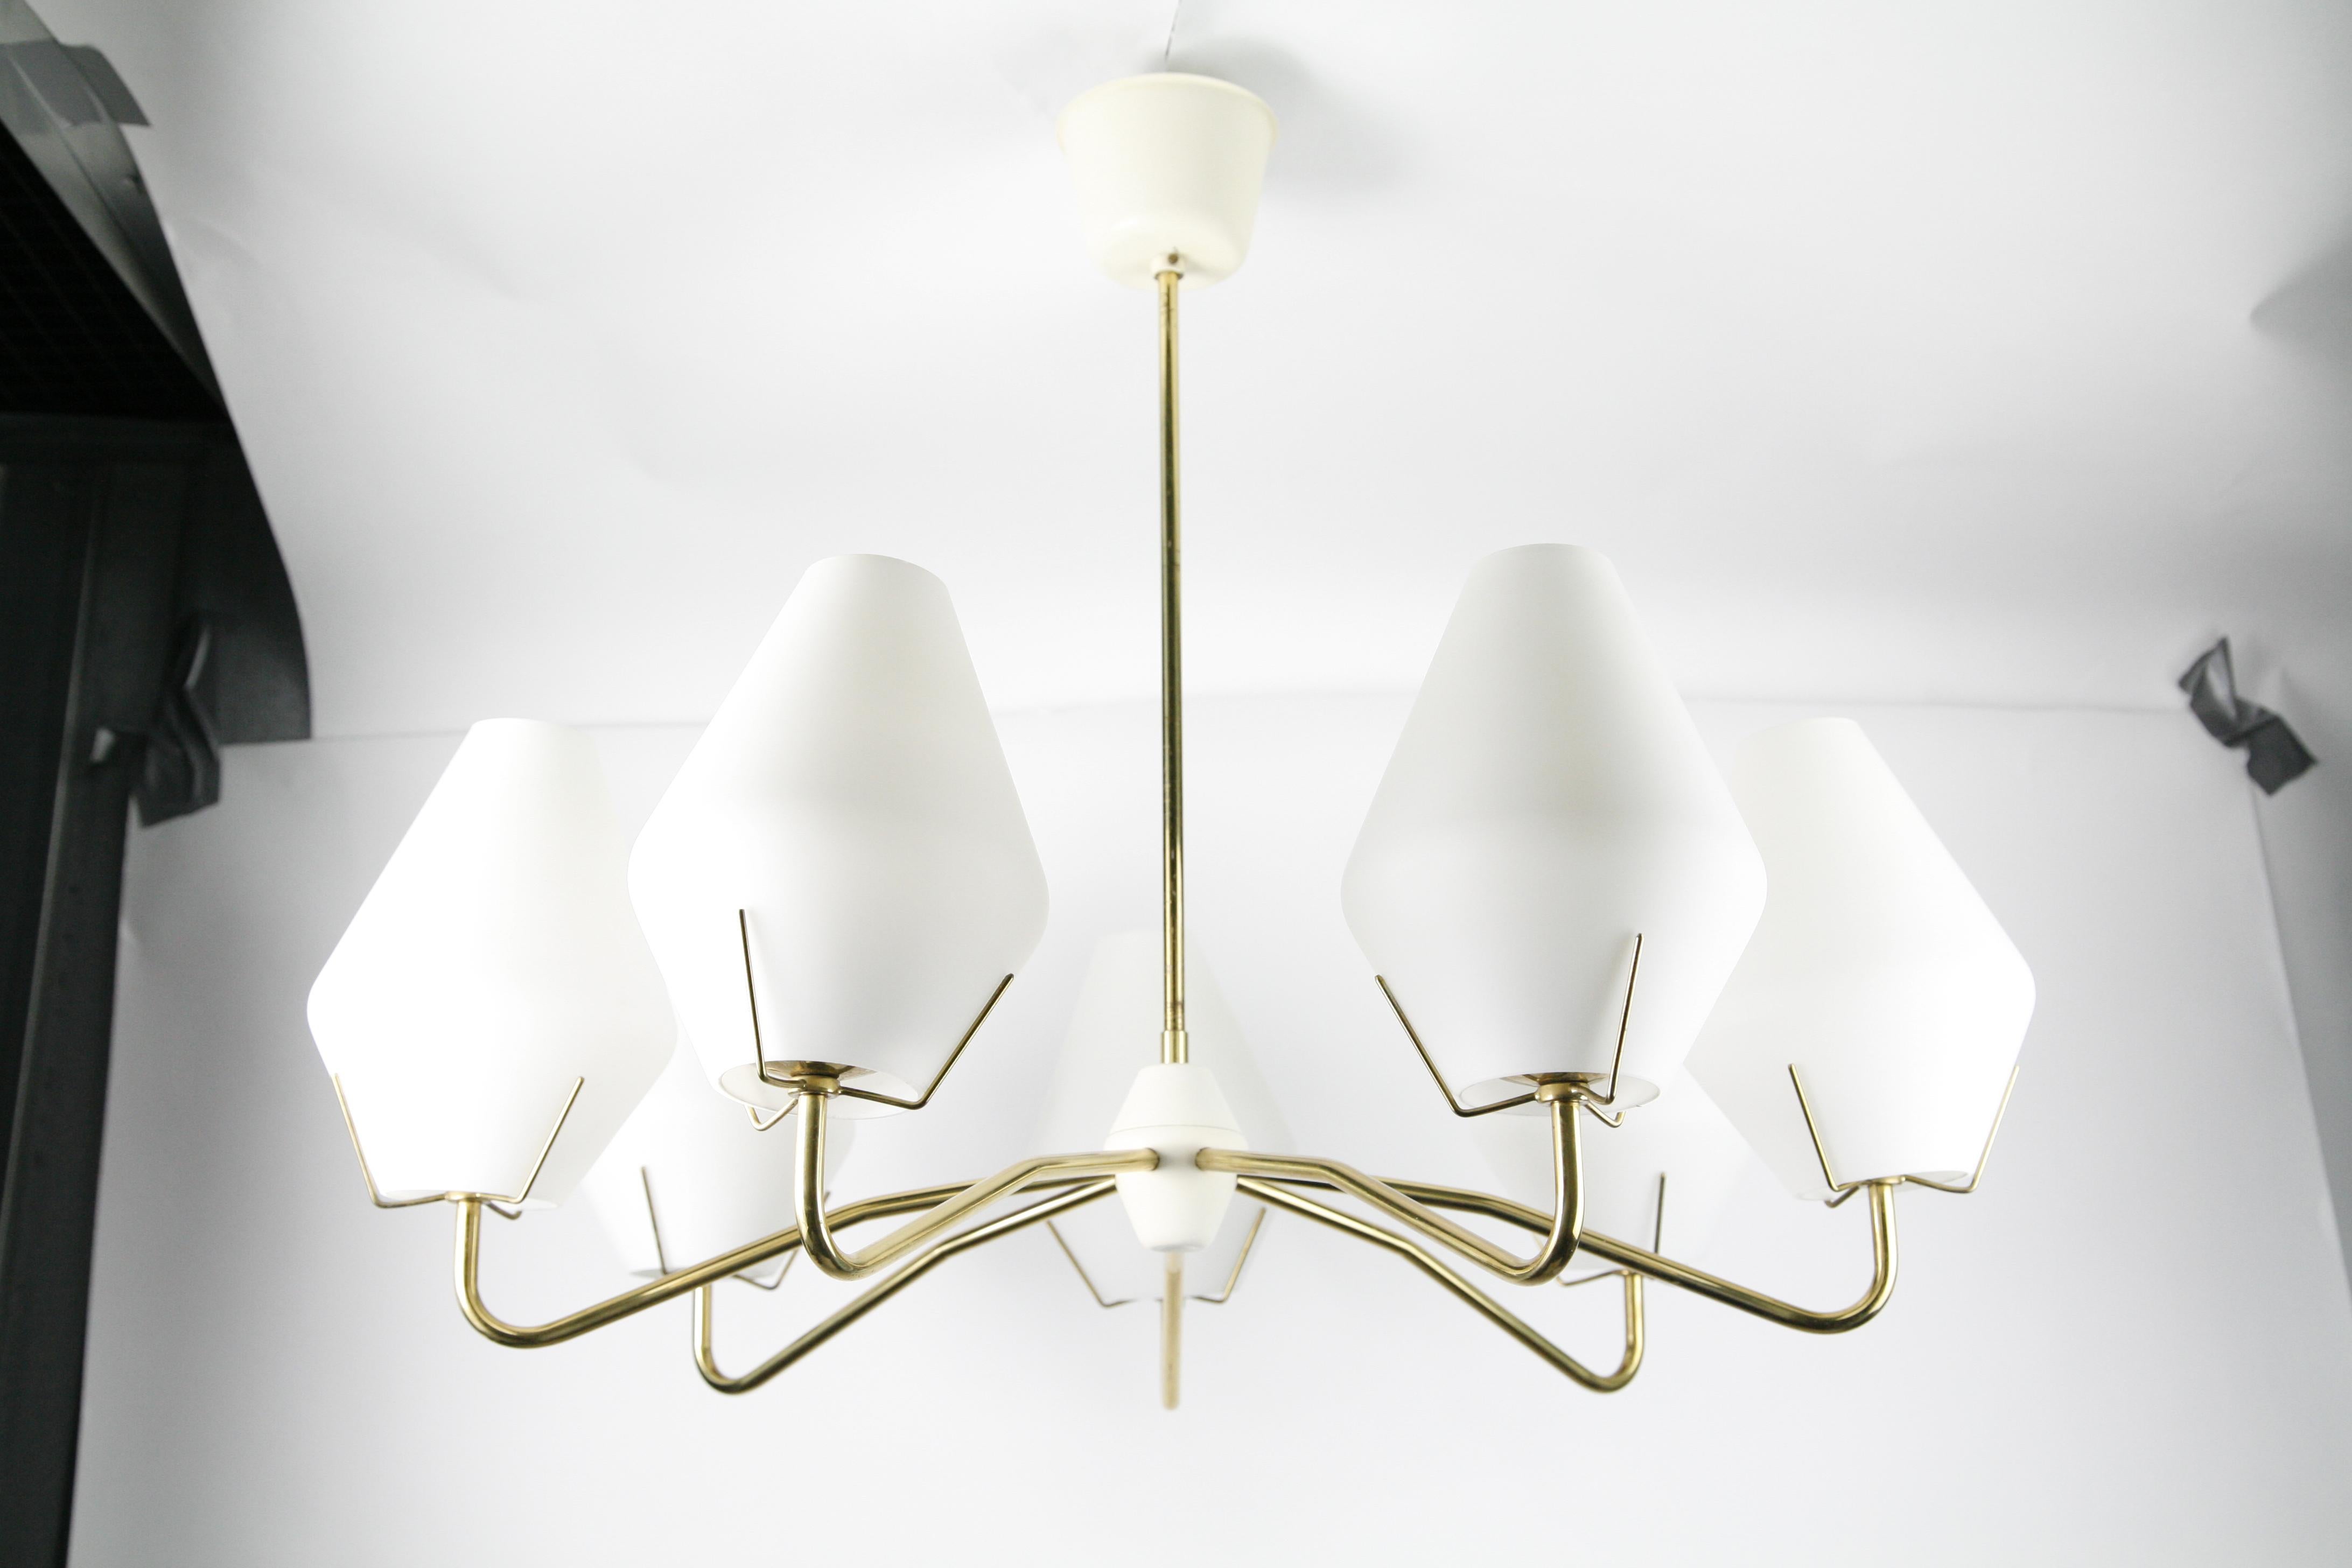 1960s brass plated frame with 7 large individual opaline glass shades that measure 7.8